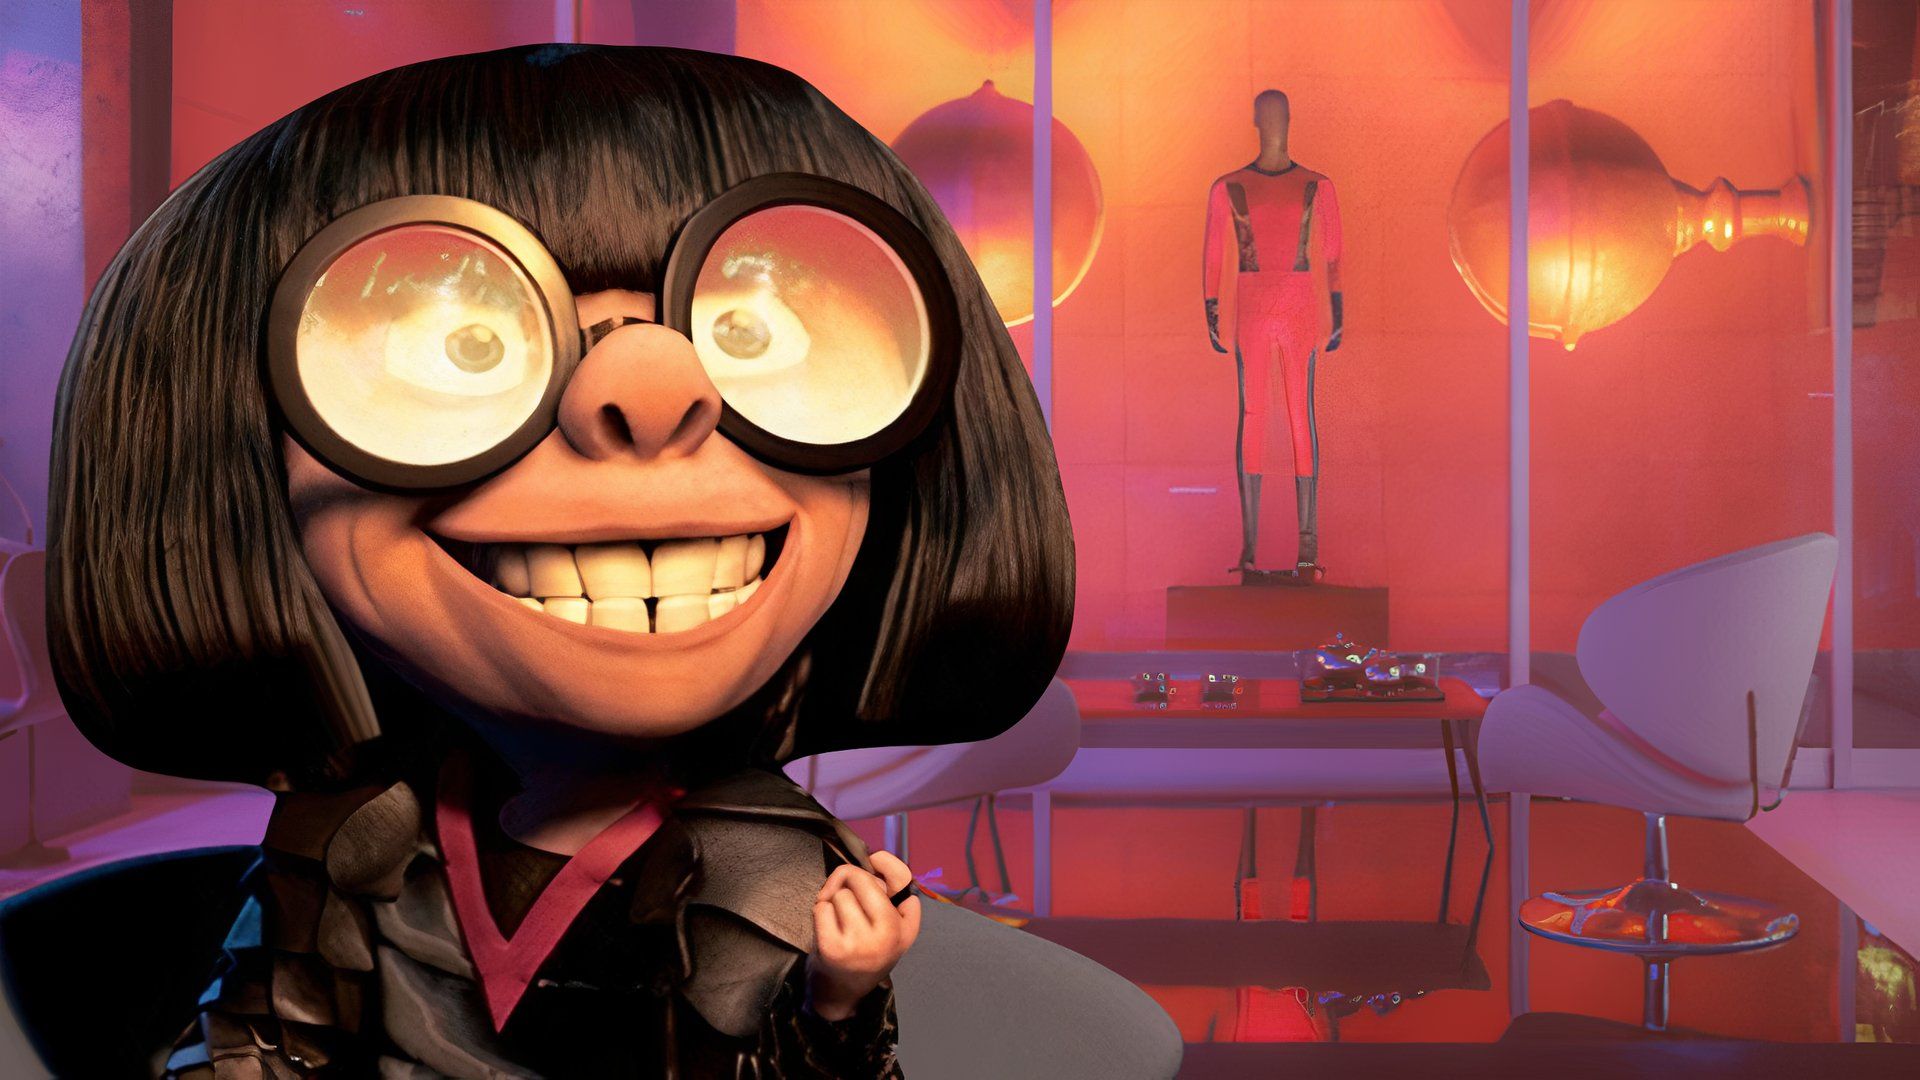 The Incredibles' Edna Mode & the AirBnB house.